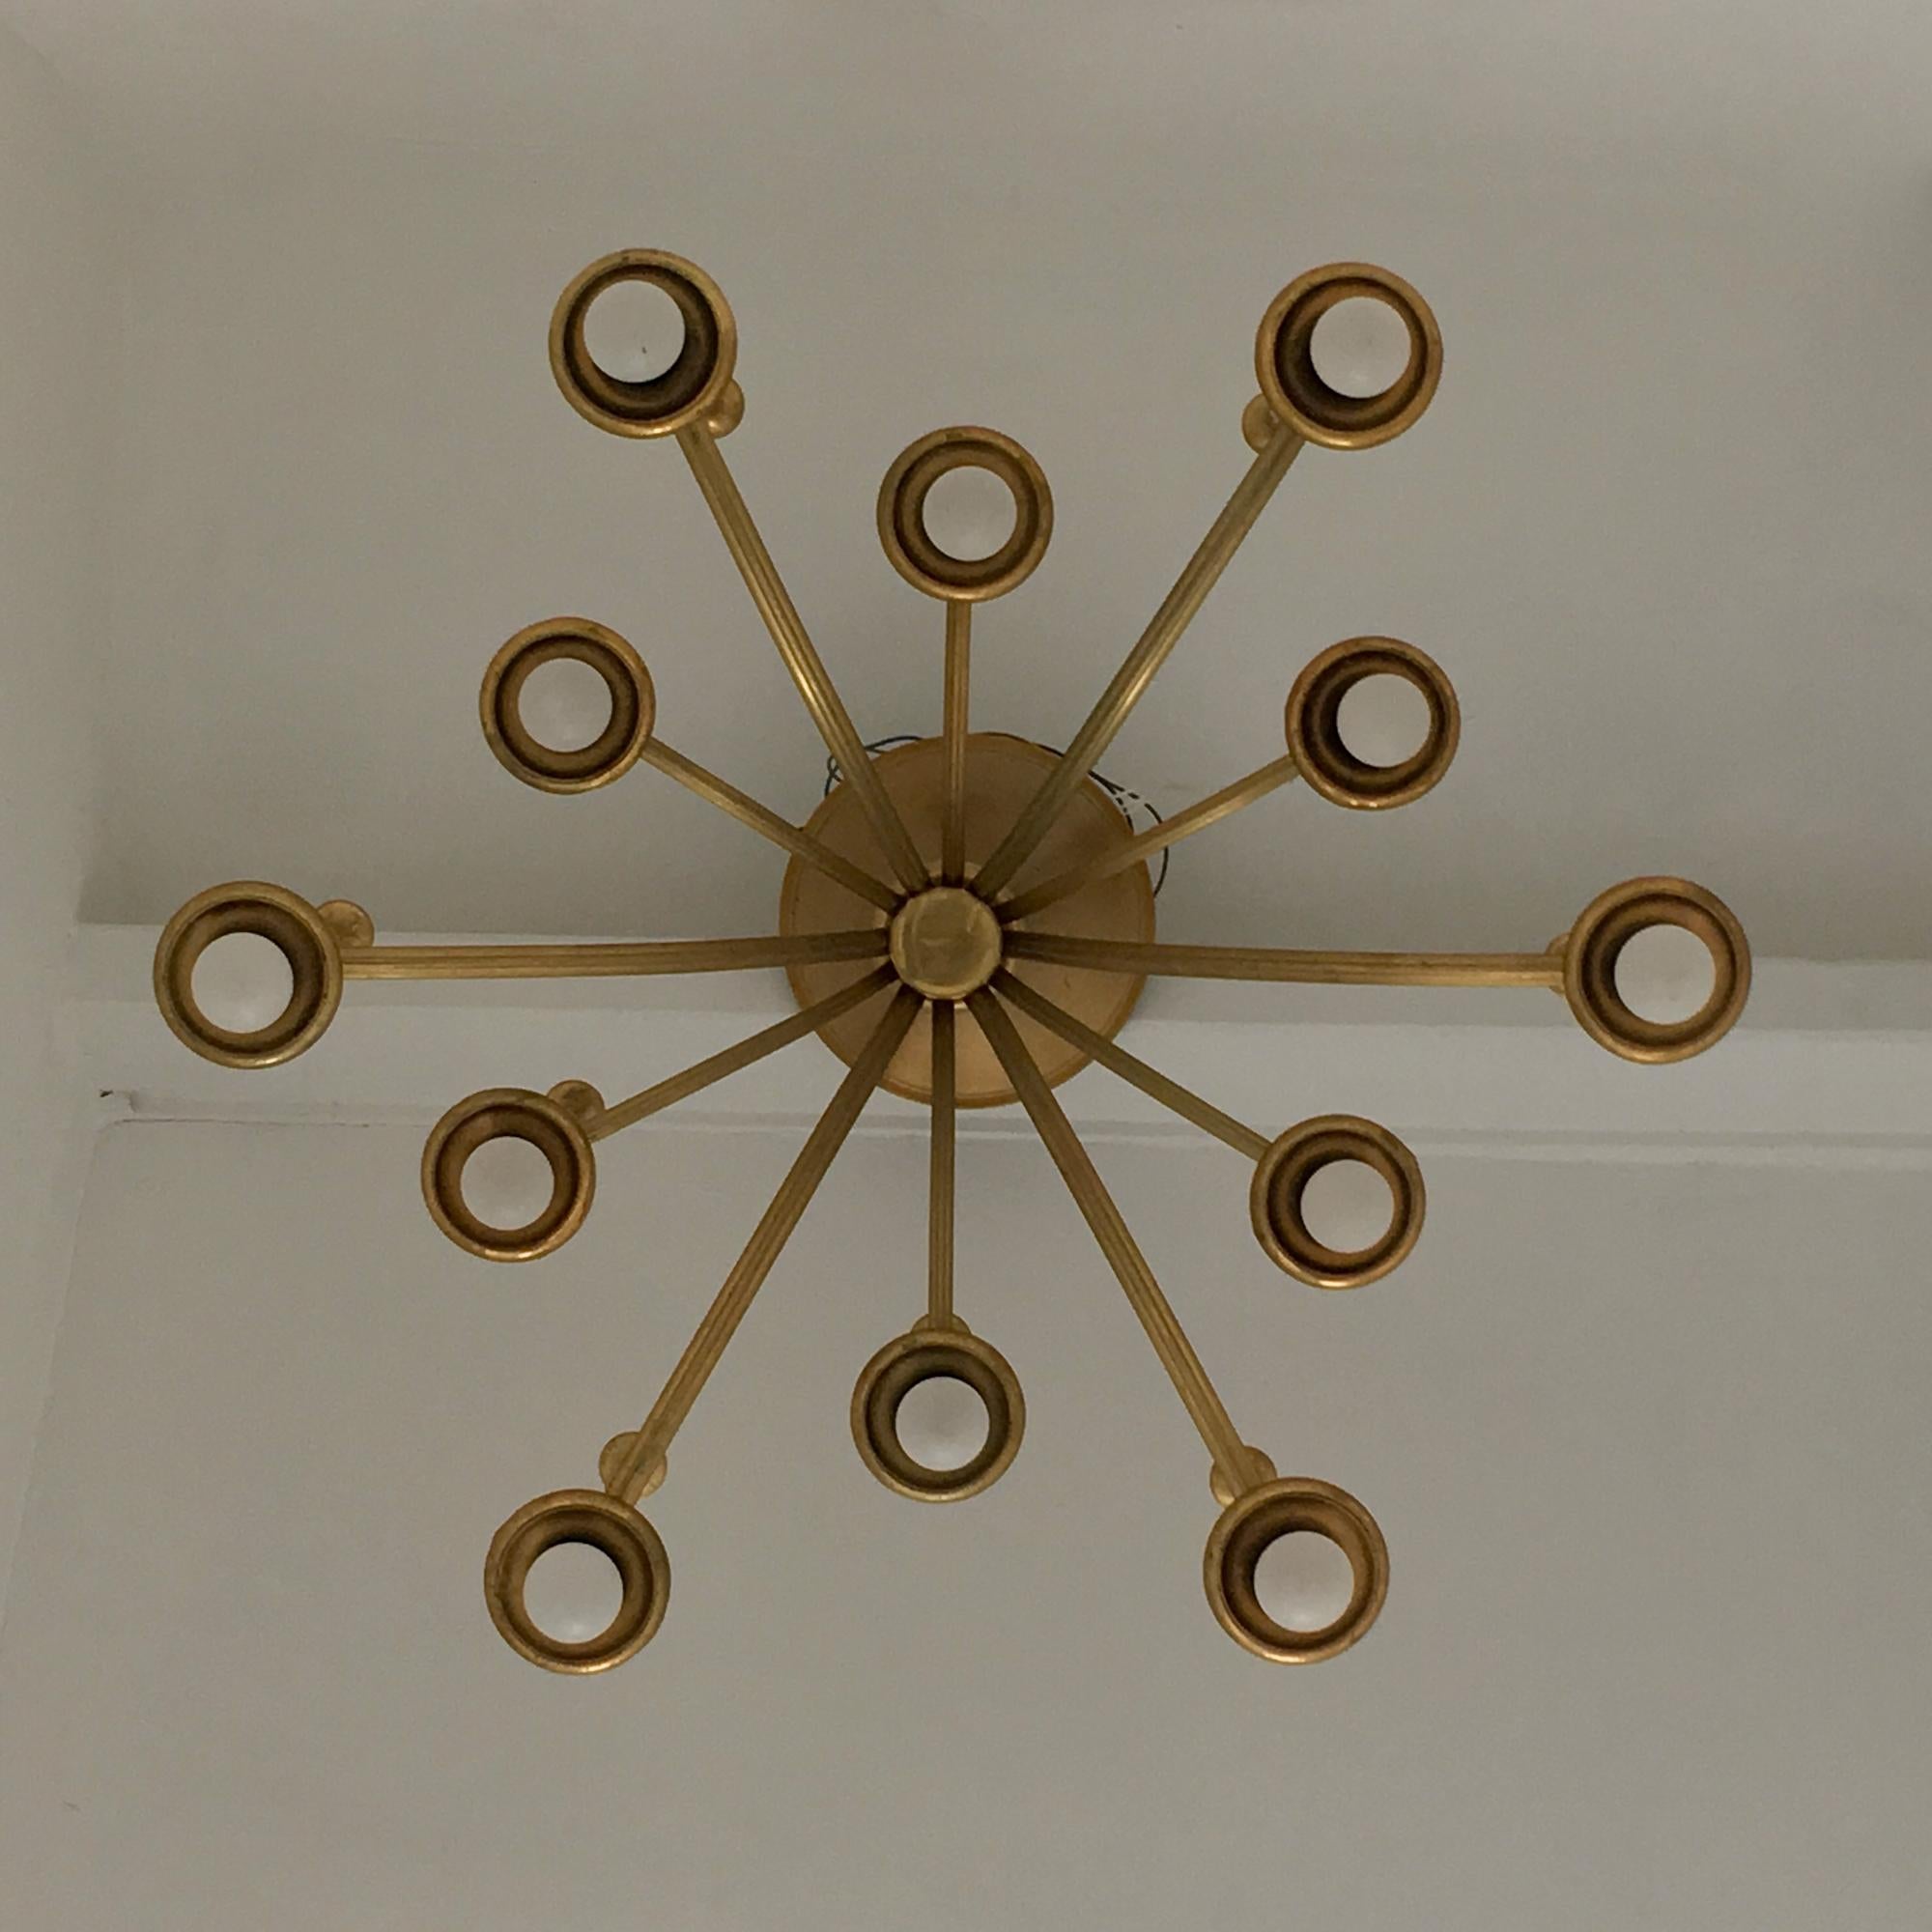 Unusual chandelier with gold satin lacquer finish; twelve arms in two tiers, each ending in an inverted trumpet and decorative stems, Italy, 1960s. 

The fixture is in fair vintage condition, with wear to the lacquer throughout in line with age. In